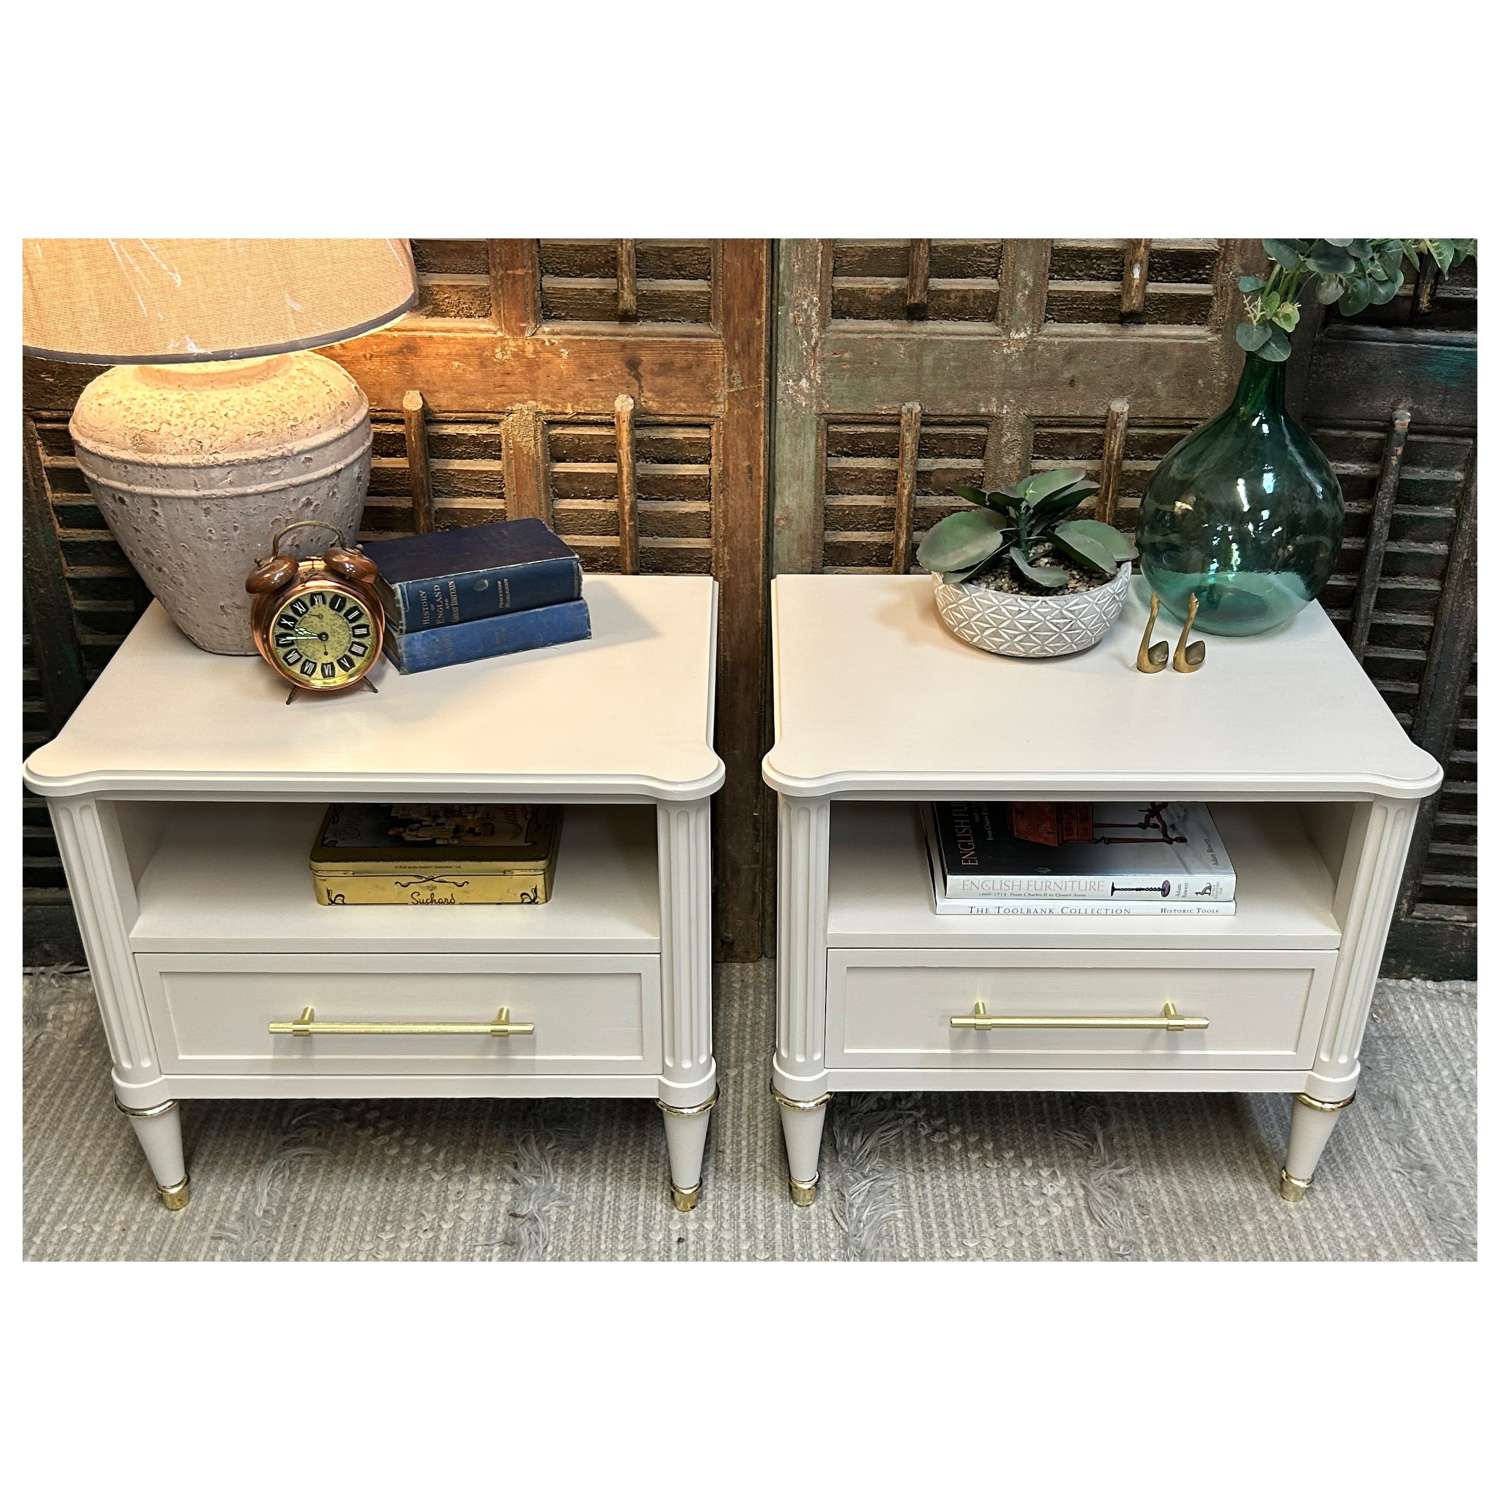 Pair of Vintage Bedside Tables in Skimming Stone by Farrow & Ball